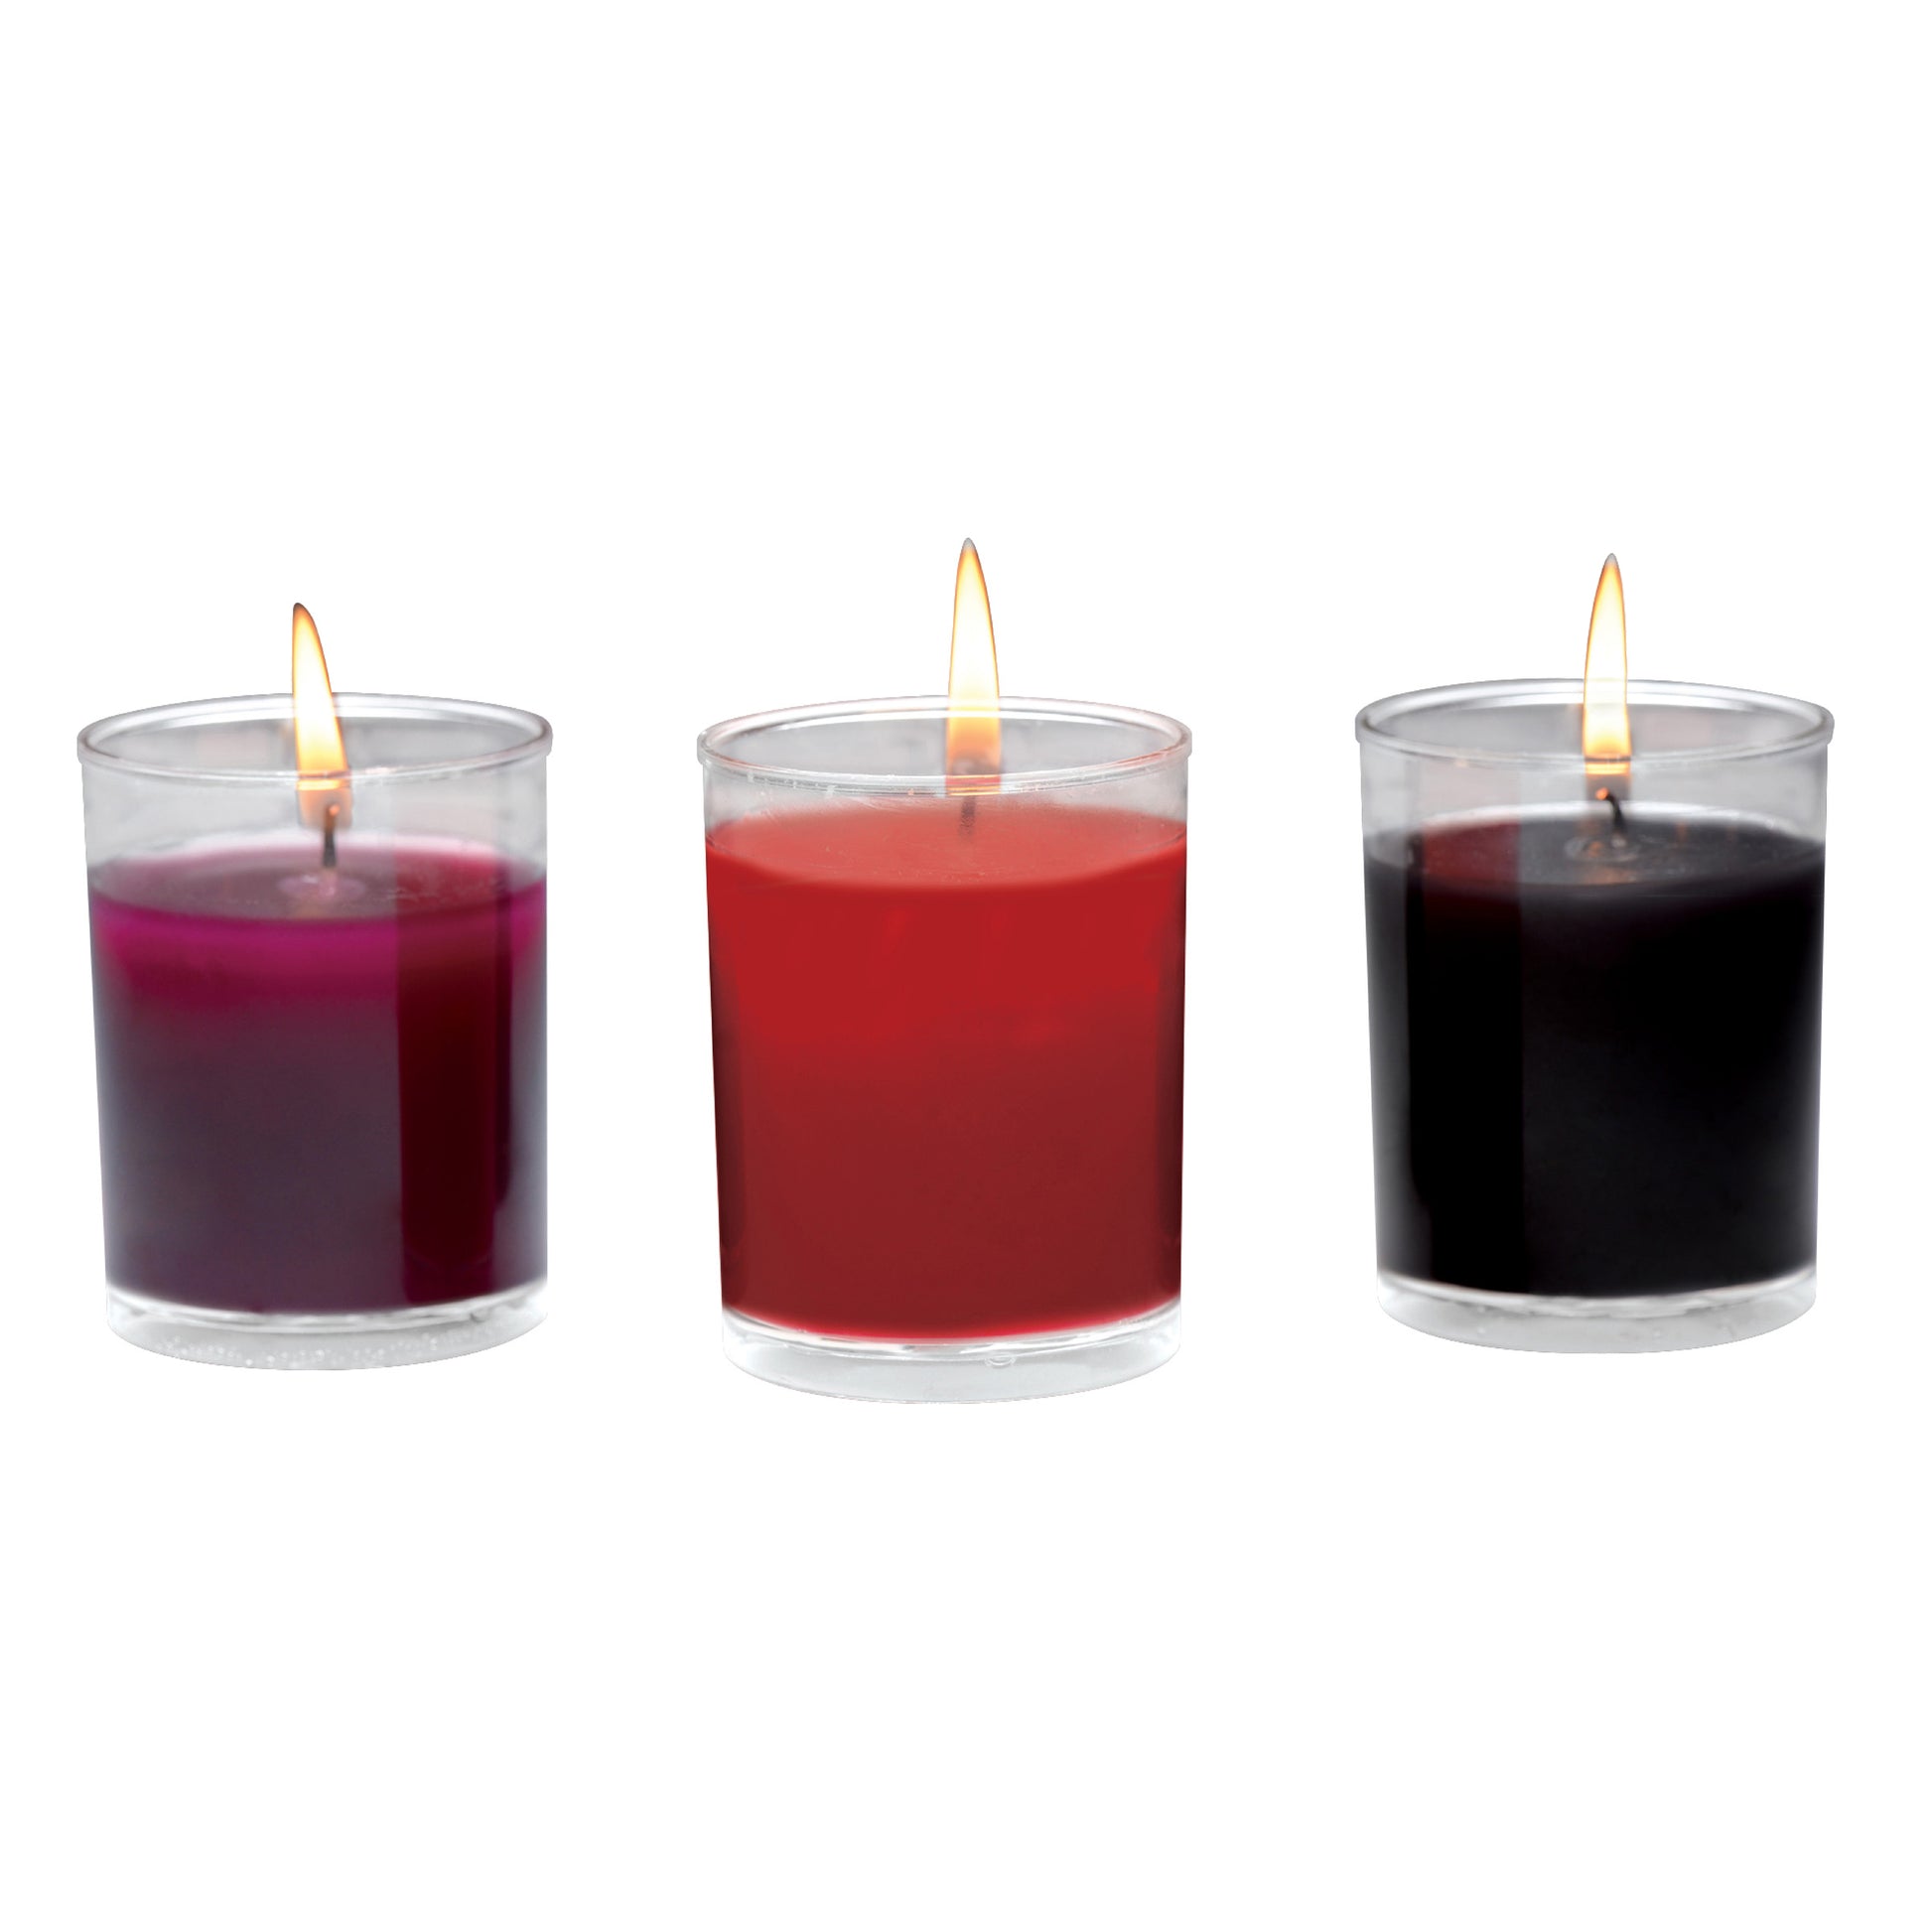 Flame Drippers Candle Set Designed for Wax Play - UABDSM